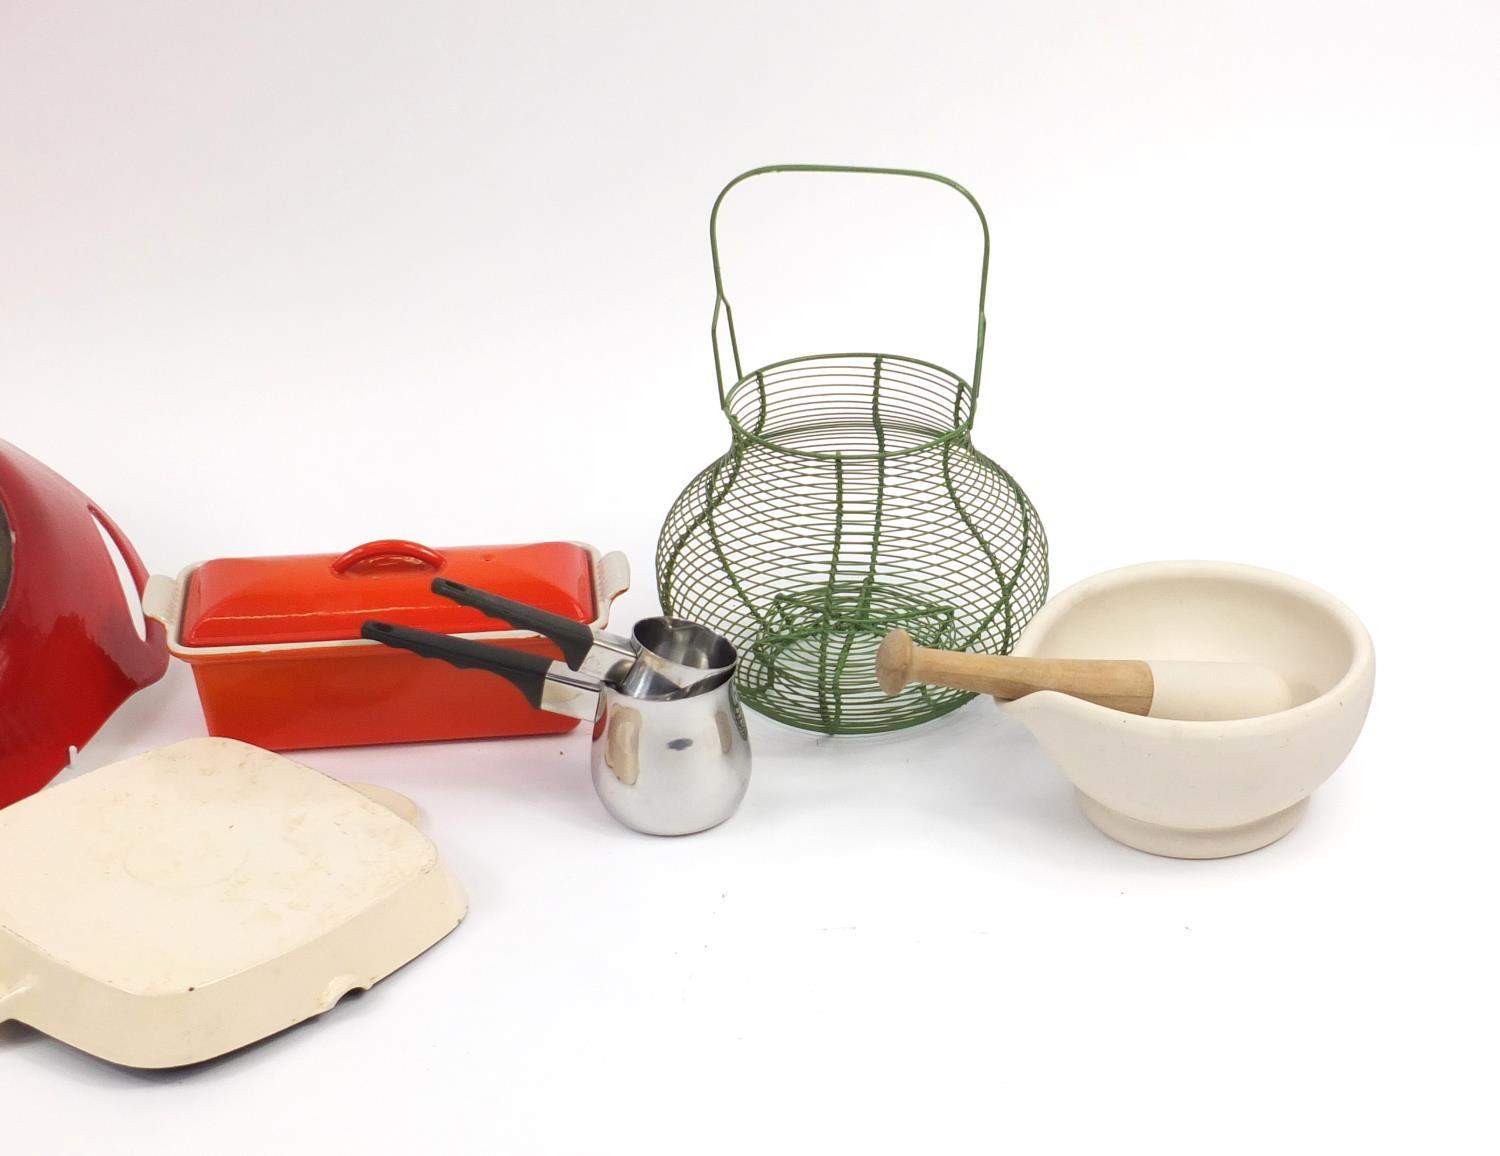 Kitchenalia comprising a parian pestle and mortar, Le Creuset paella dish, baking dish and griddle - Image 7 of 9